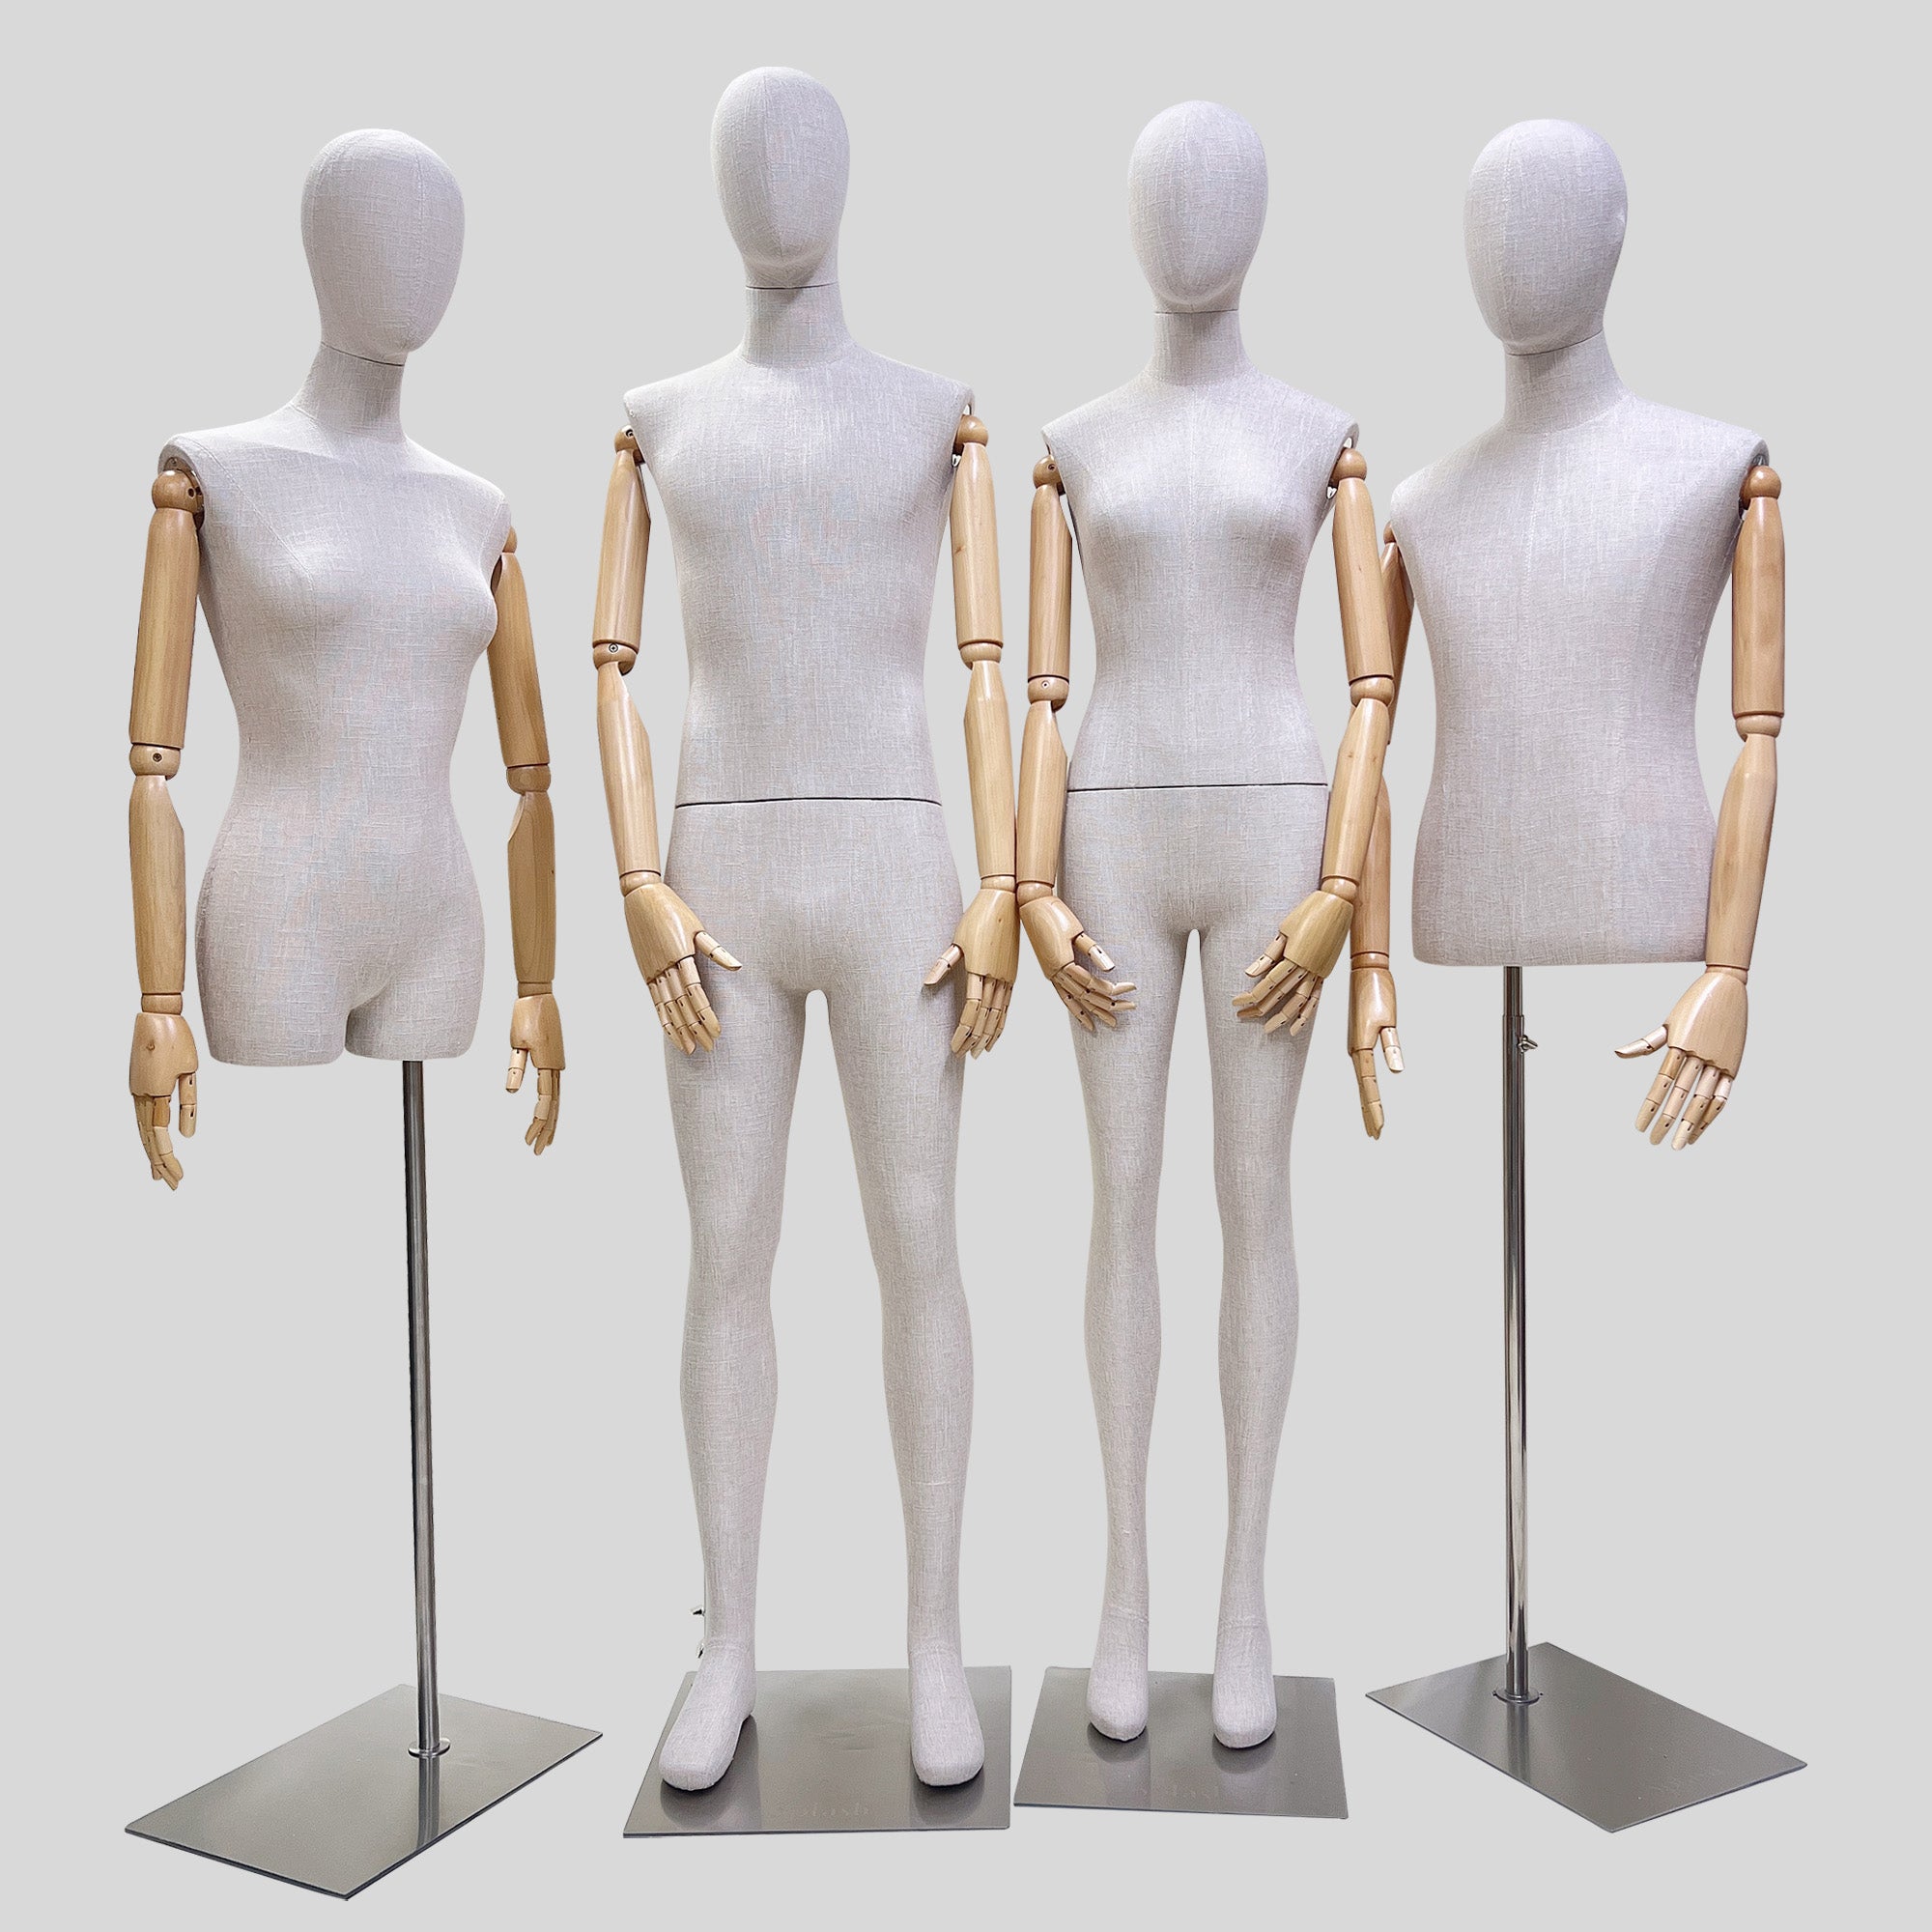 Full body male mannequin glossy white wooden articulated arms by amebma -  Afrikrea